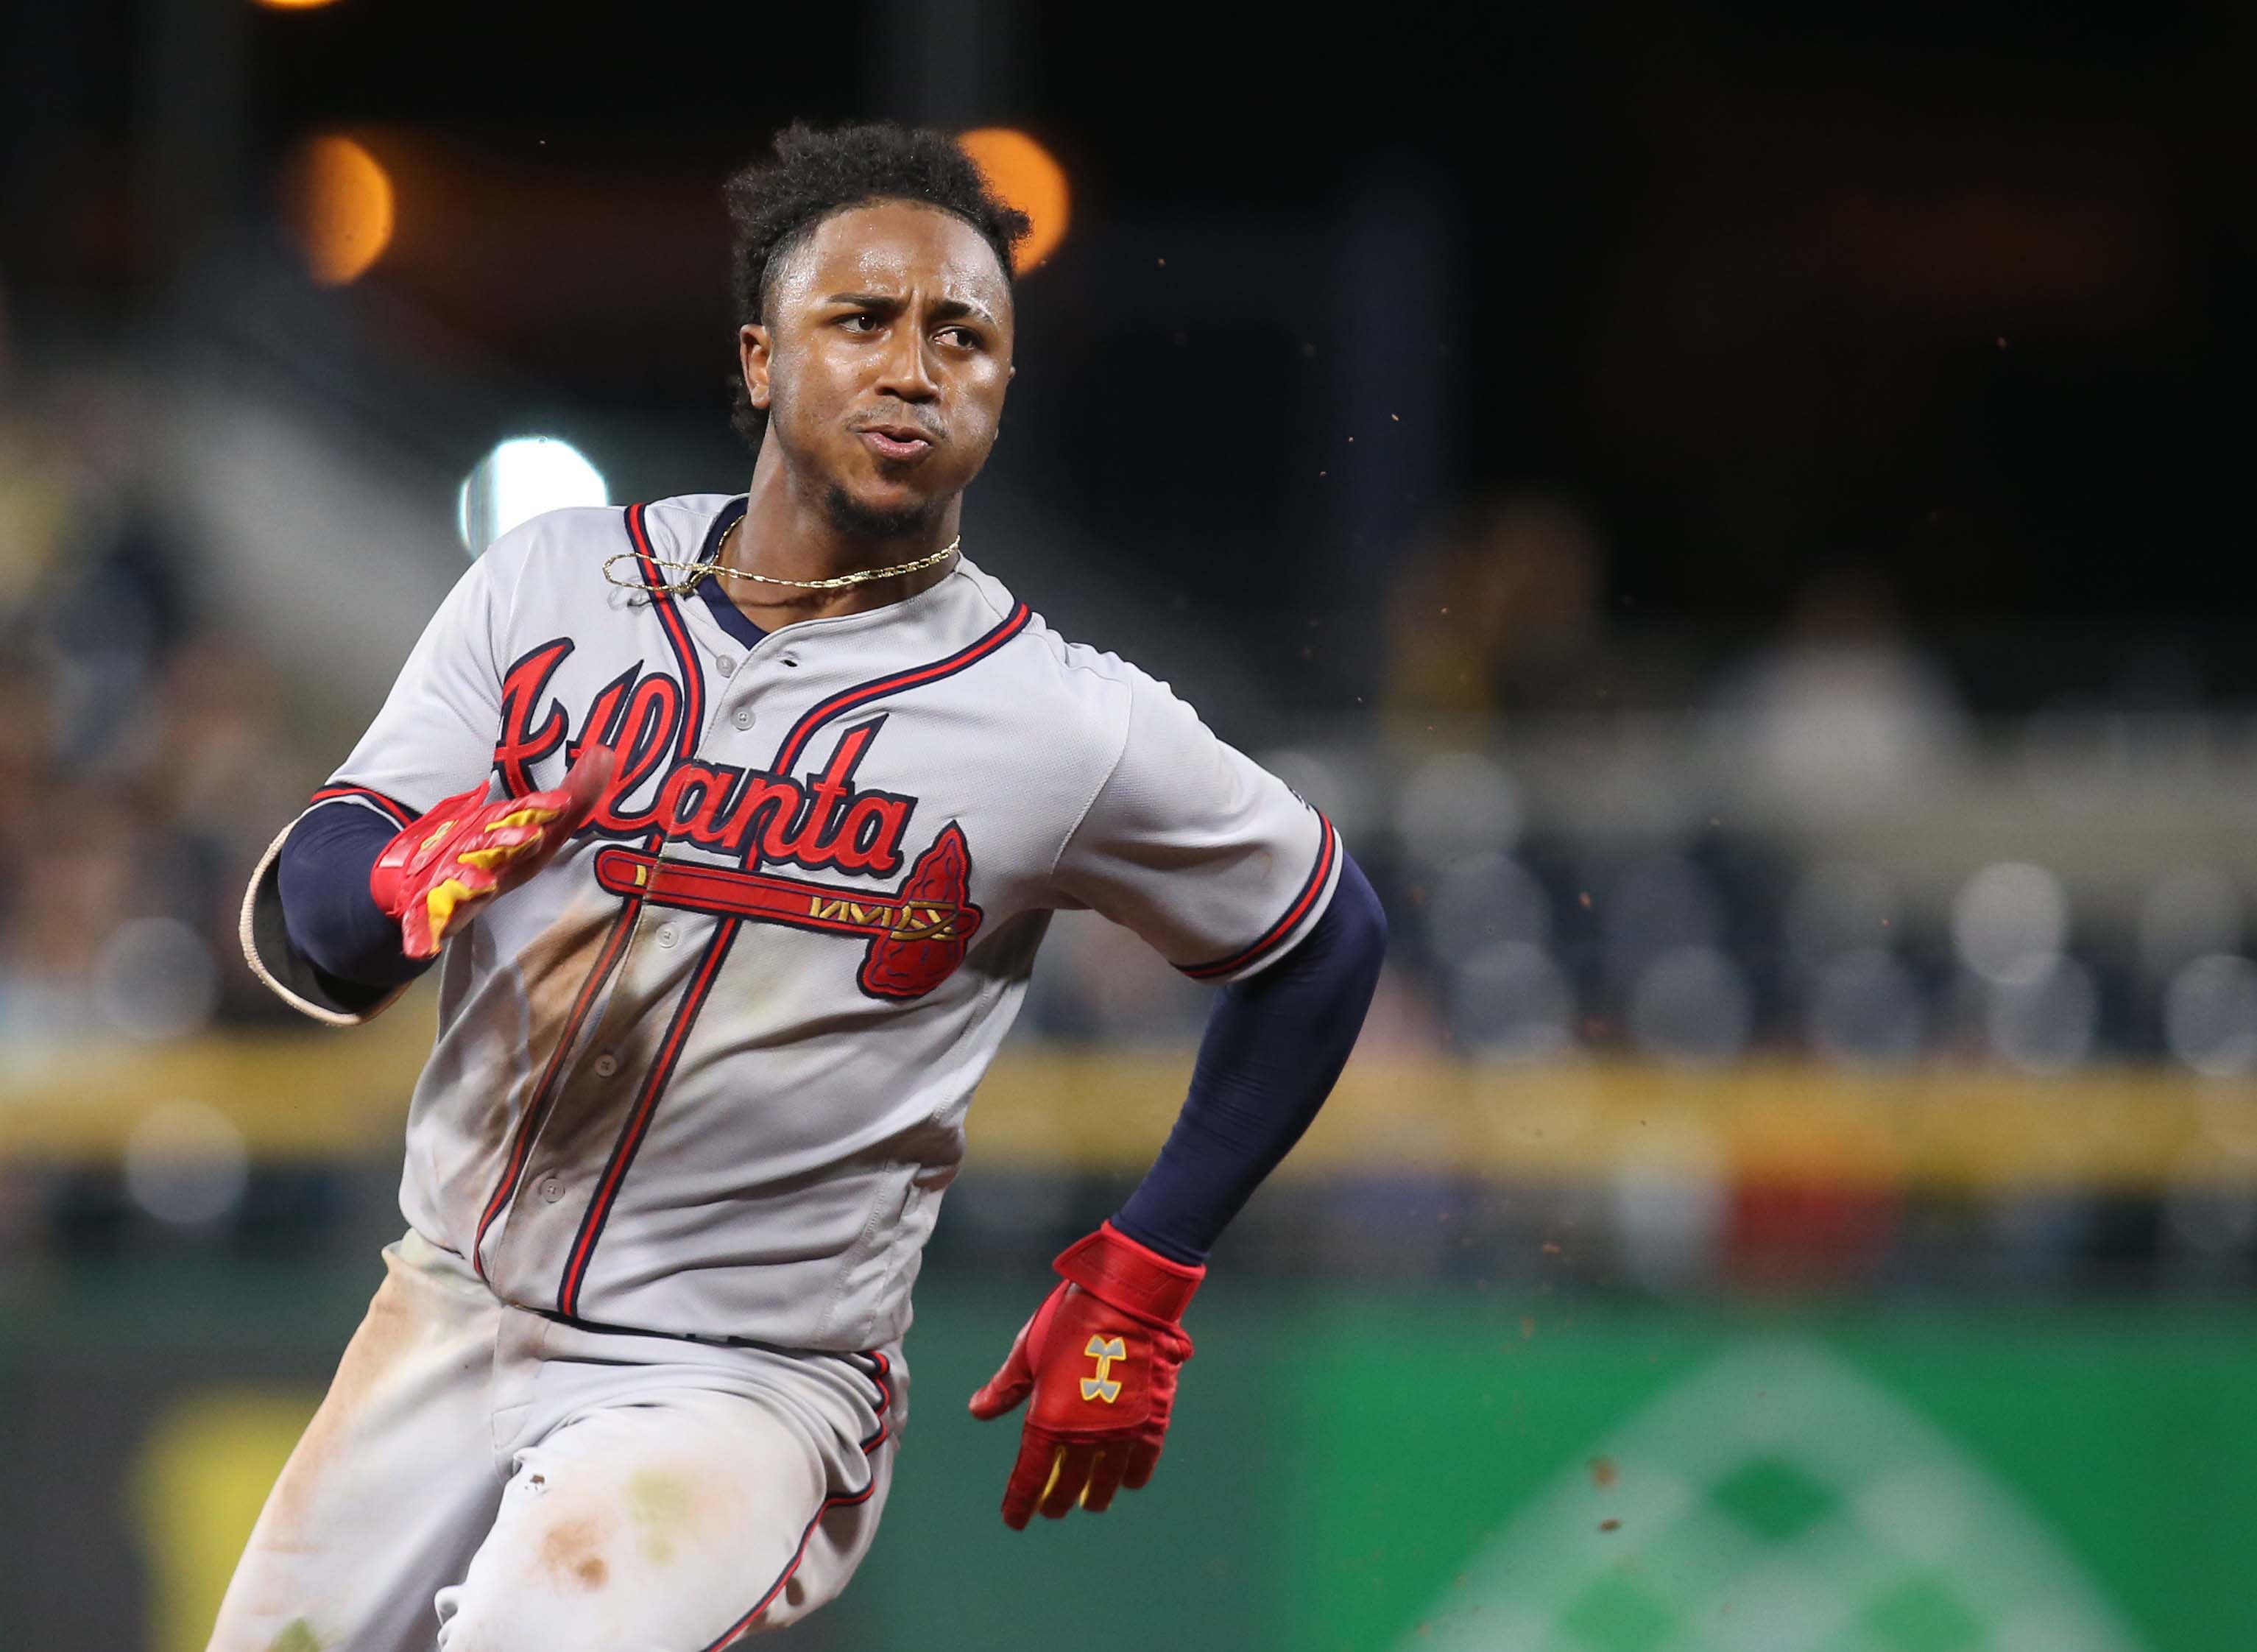 Frustrating' Ozzie Albies Deal Could Prove Harmful to Small